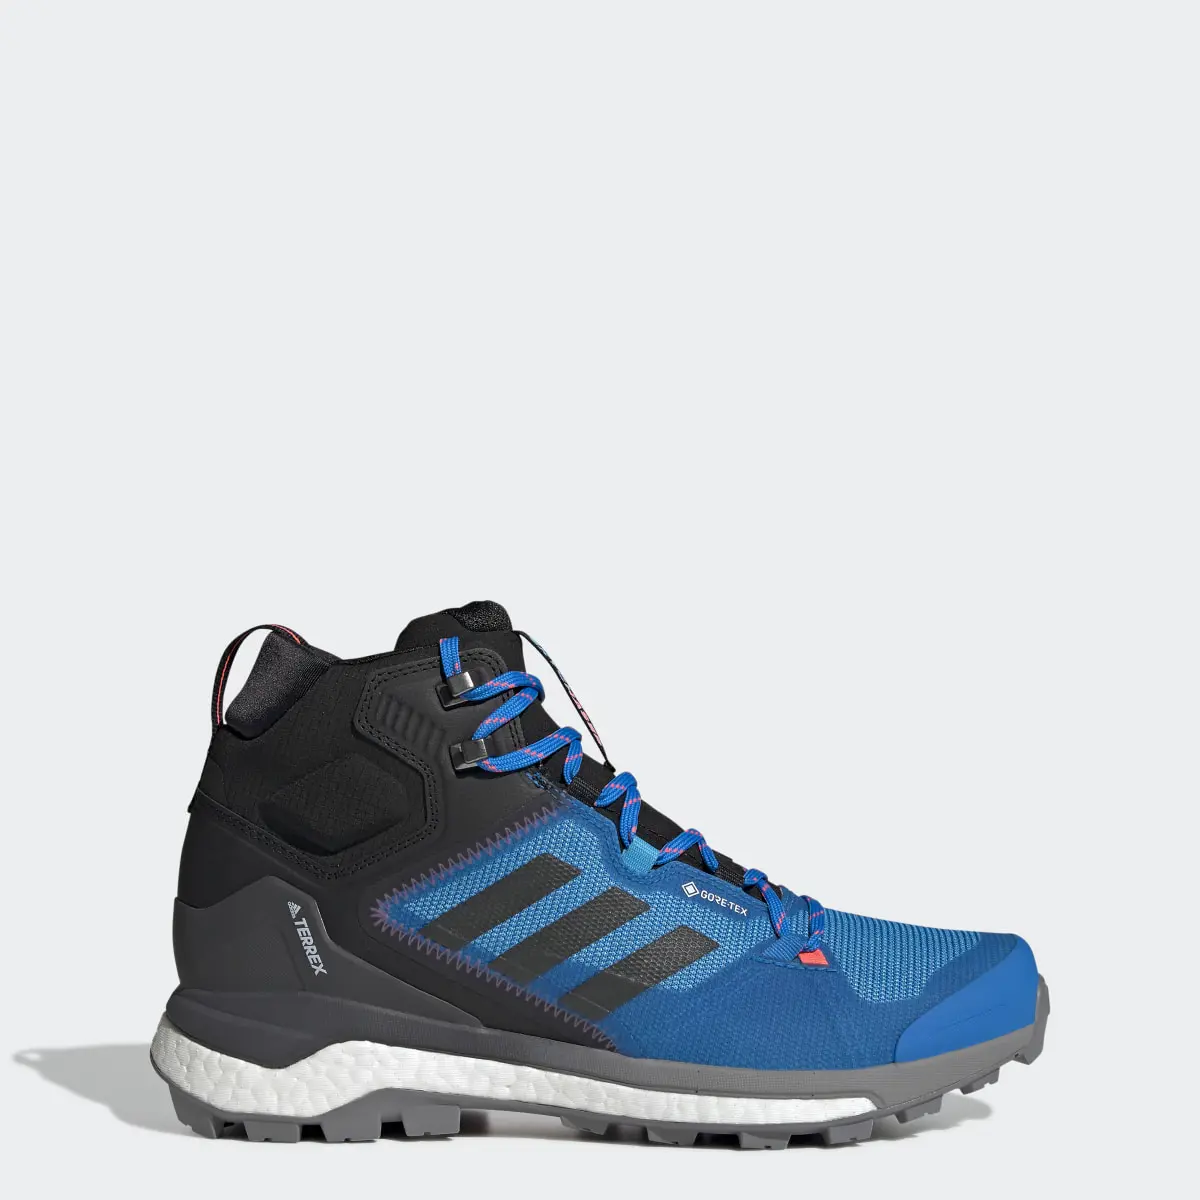 Adidas TERREX Skychaser 2 Mid GORE-TEX Hiking Shoes. 1